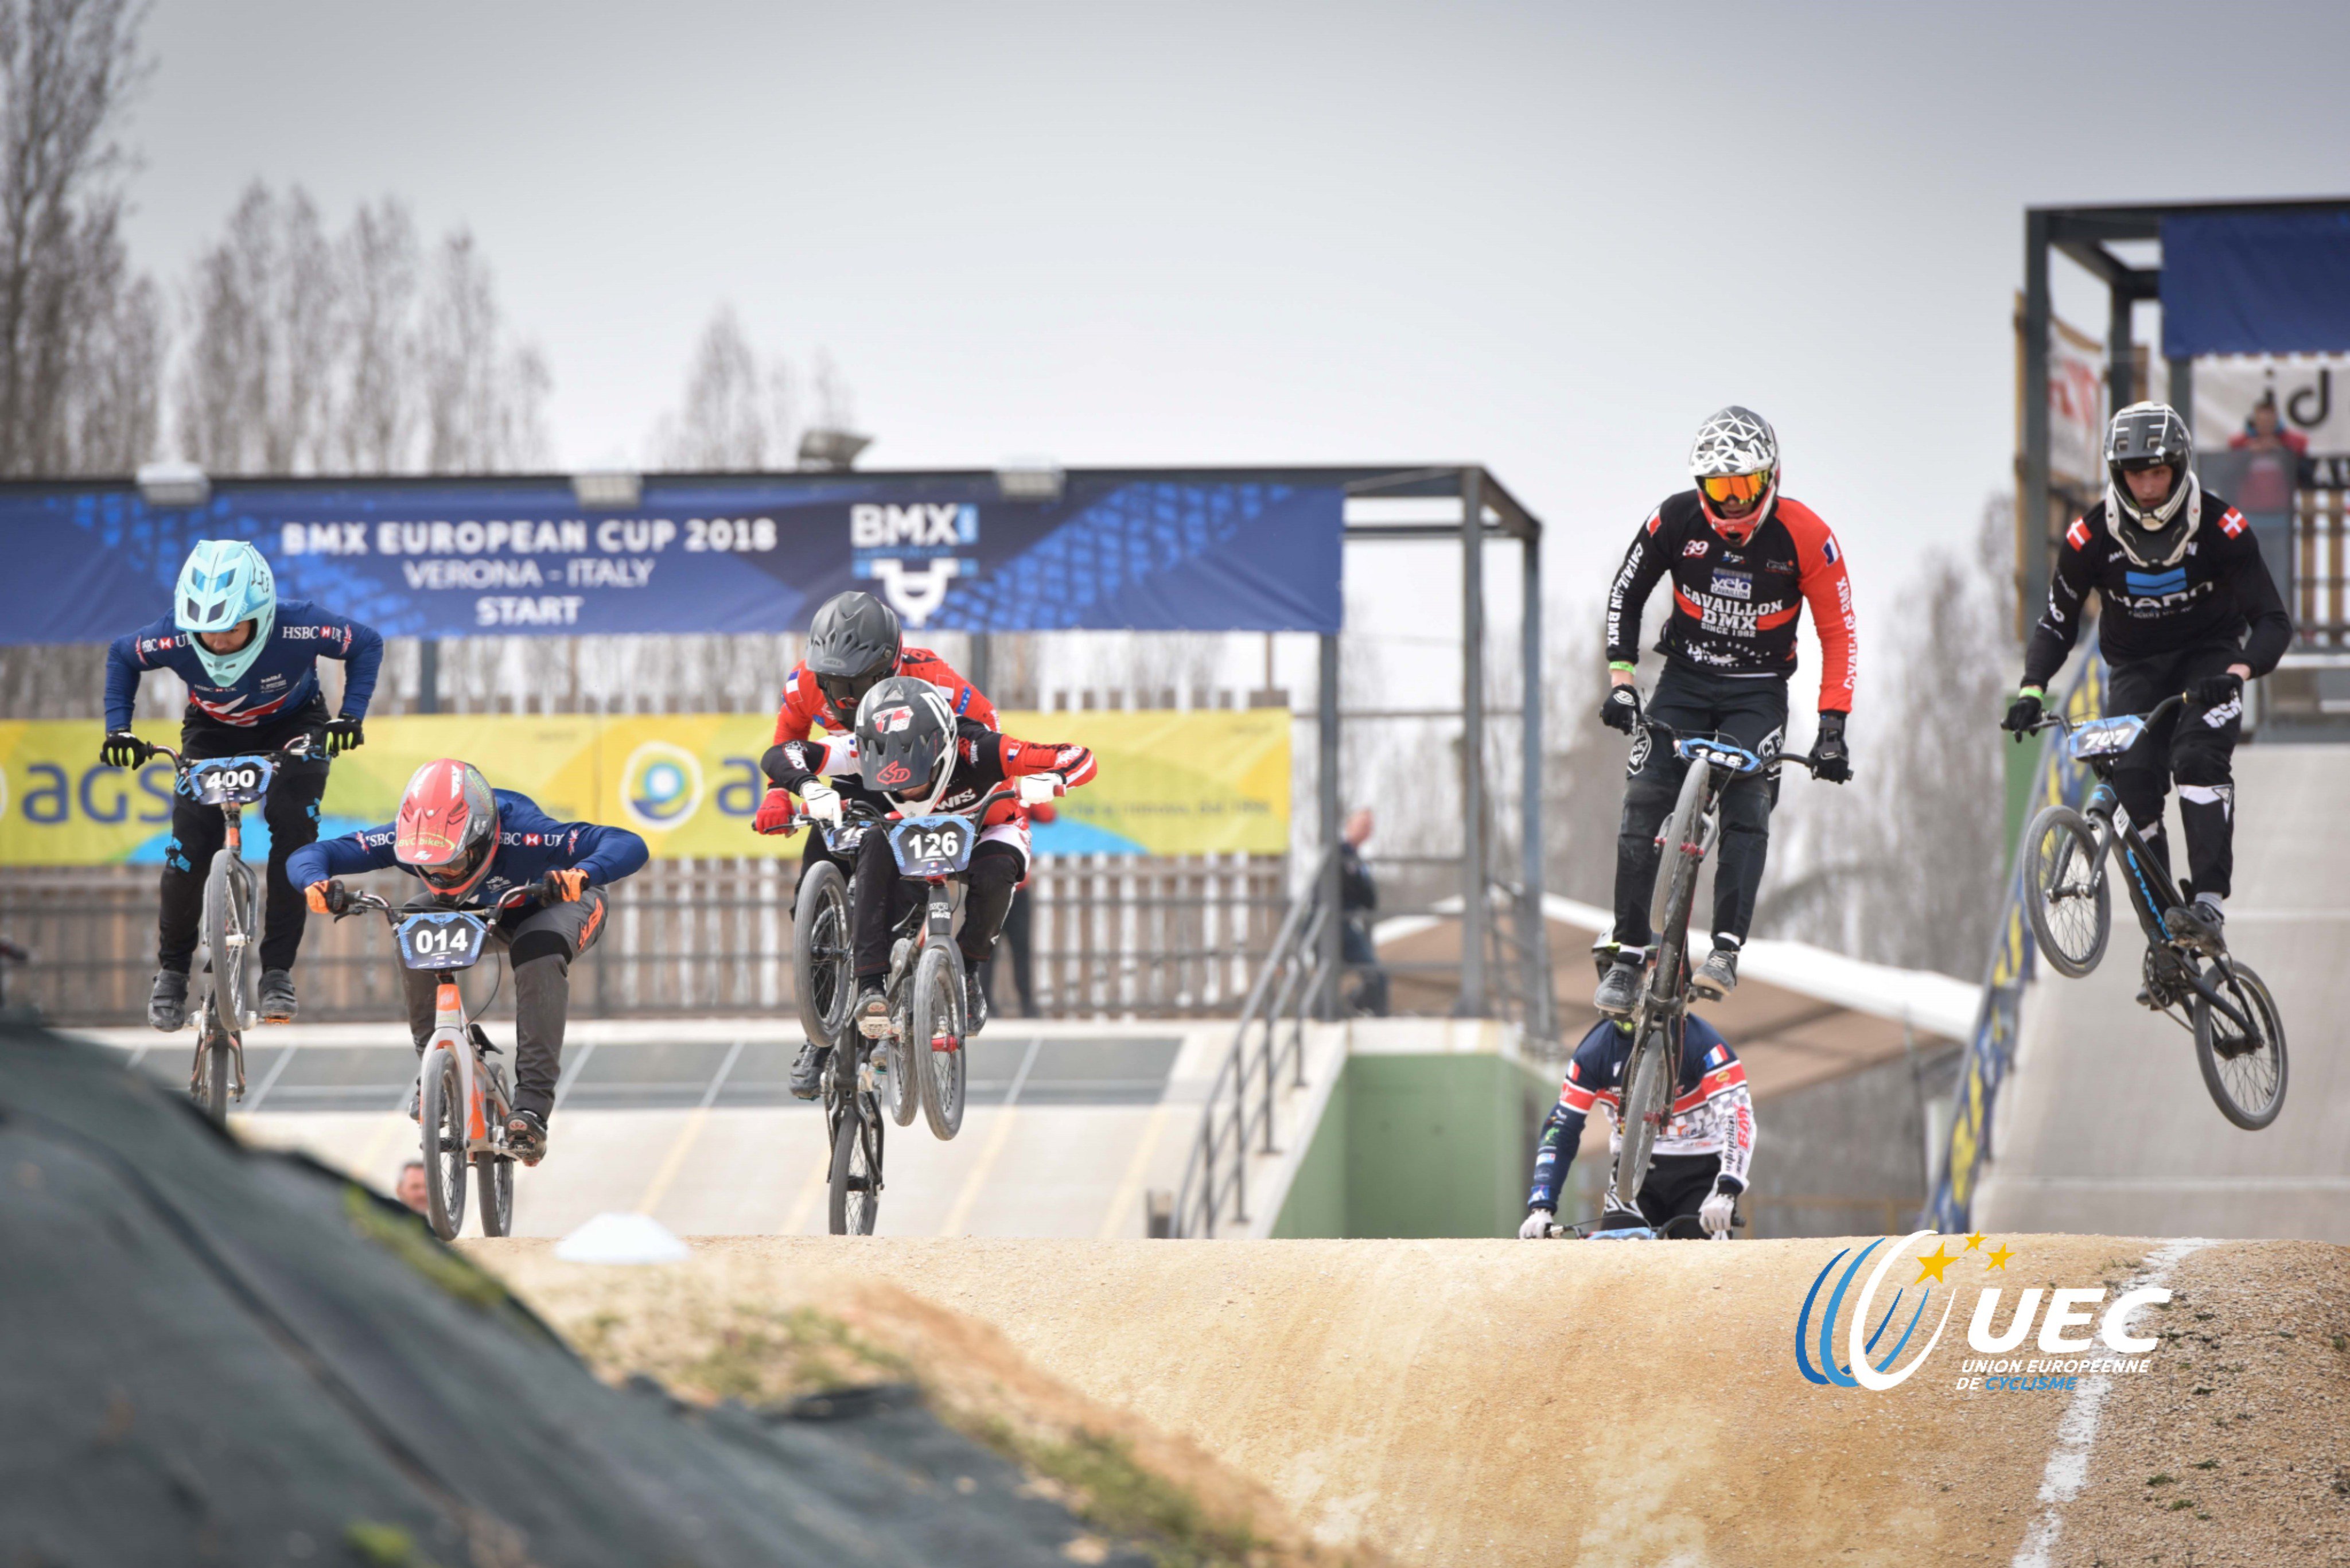 handicapped Automatically sort UEC_cycling on Twitter: "🔜 #UECprepares 📢 Our first 2019 event: 📰 2019 UEC  BMX European Cup, Rounds 1/2 🚴🏻‍♀️ Elite, Juniors, Challenge 📆 30/31  March 📍 Verona 🇮🇹 #⃣ #BMXEuroCup19 📺 Live